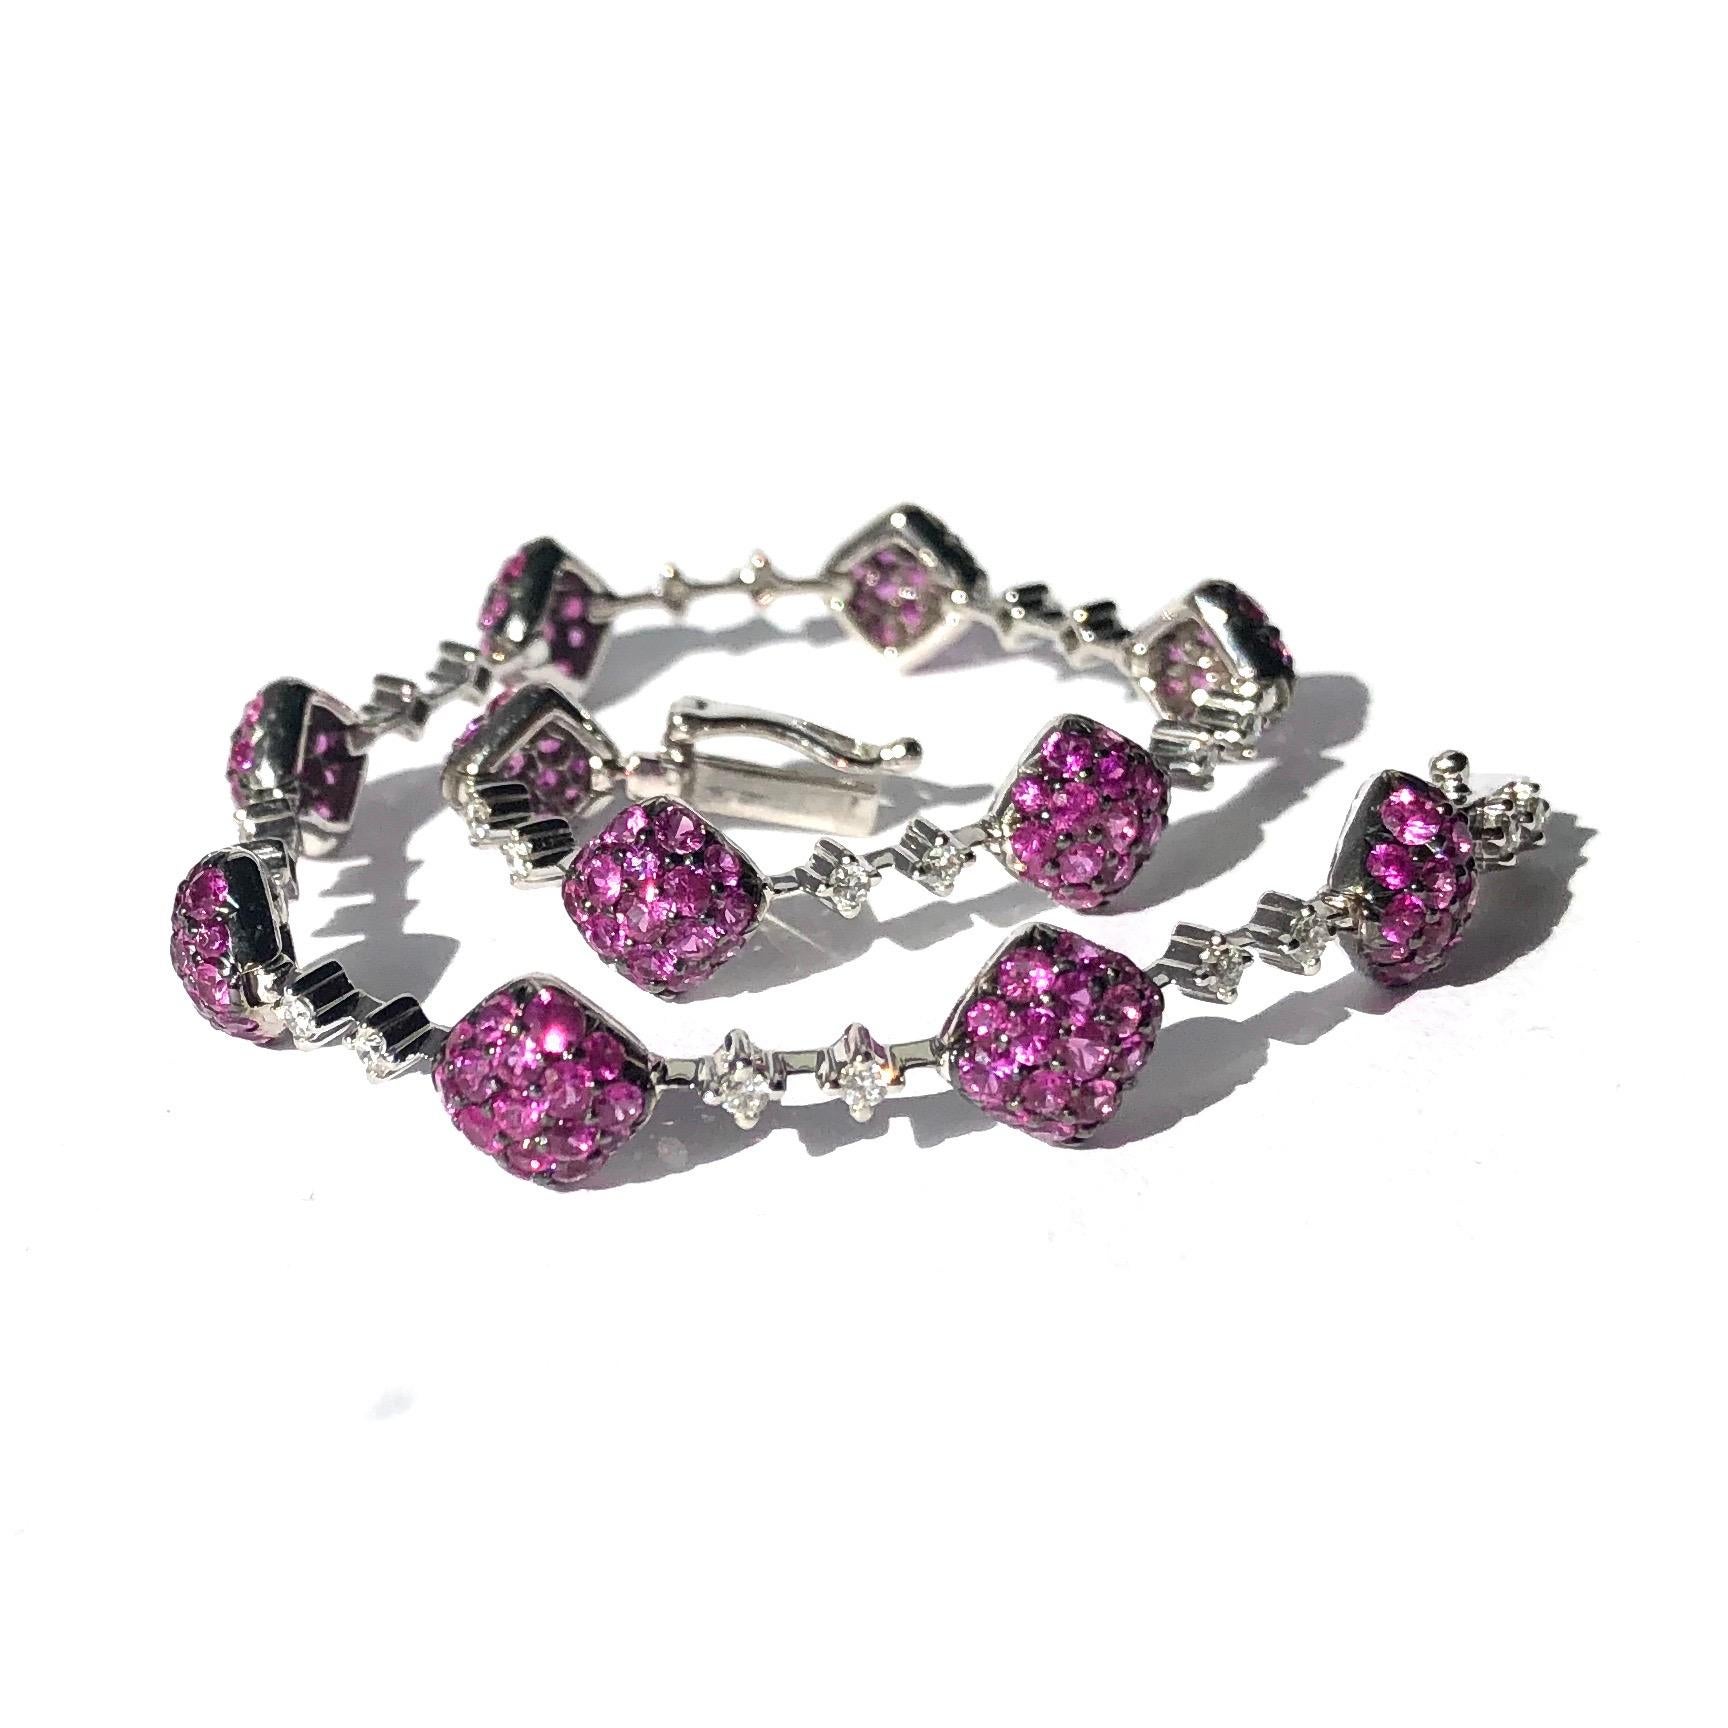 This show stopping bracelet is adorned with glittering deep pink rubies. The rubies are set within cushion panels which are connected by a link that also holds two diamonds as well as the clasp. Each ruby ranges in size from 2-4pts and there are a